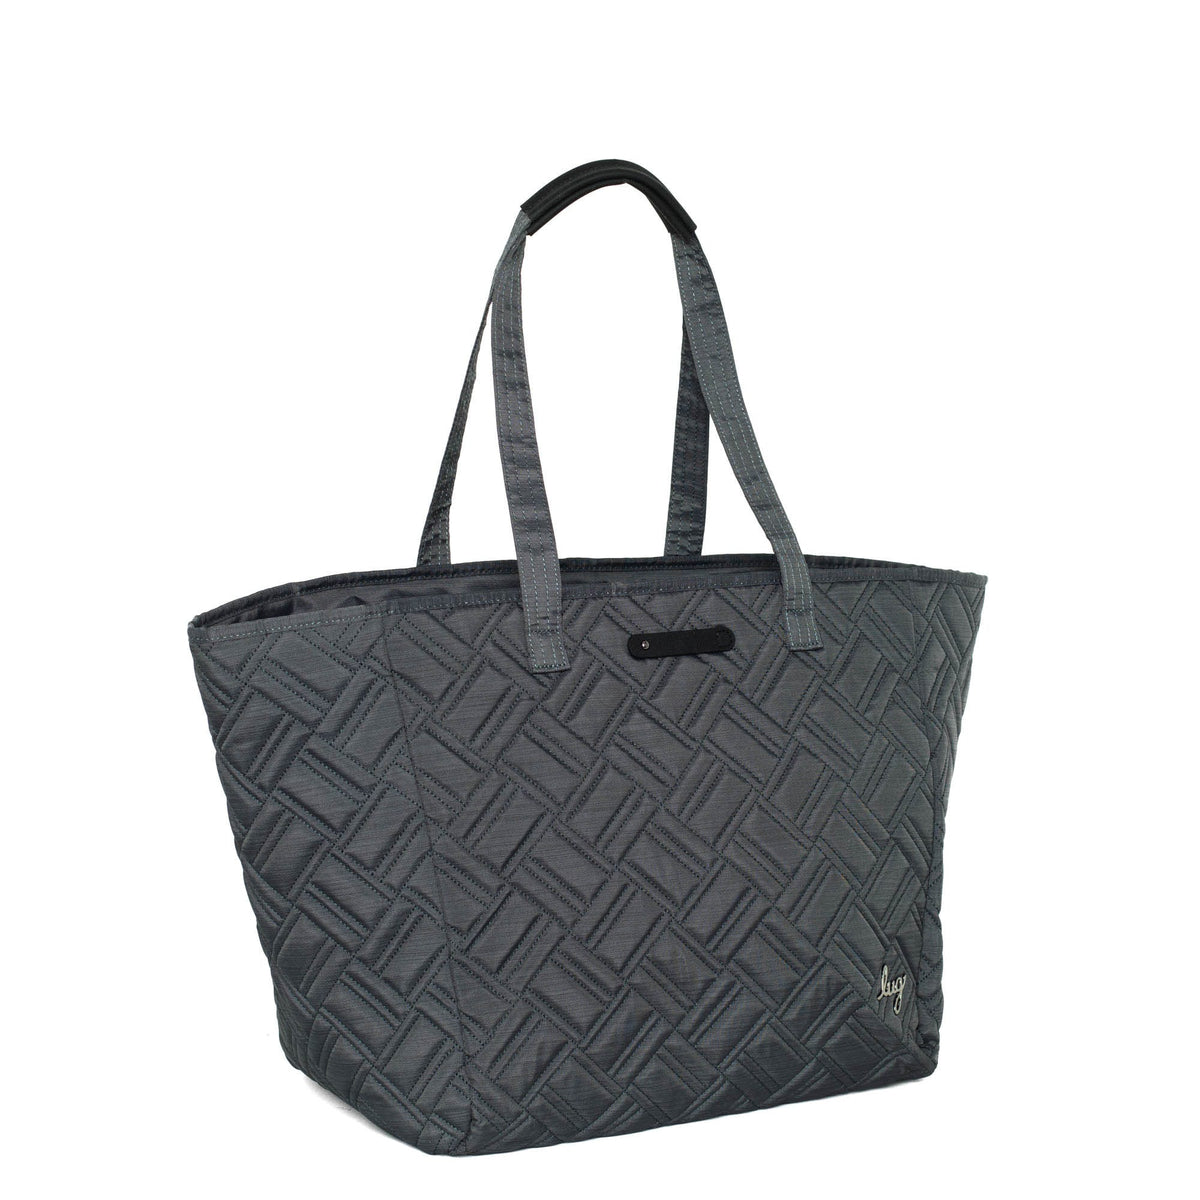 Avion 2 Carry-All Tote Bag